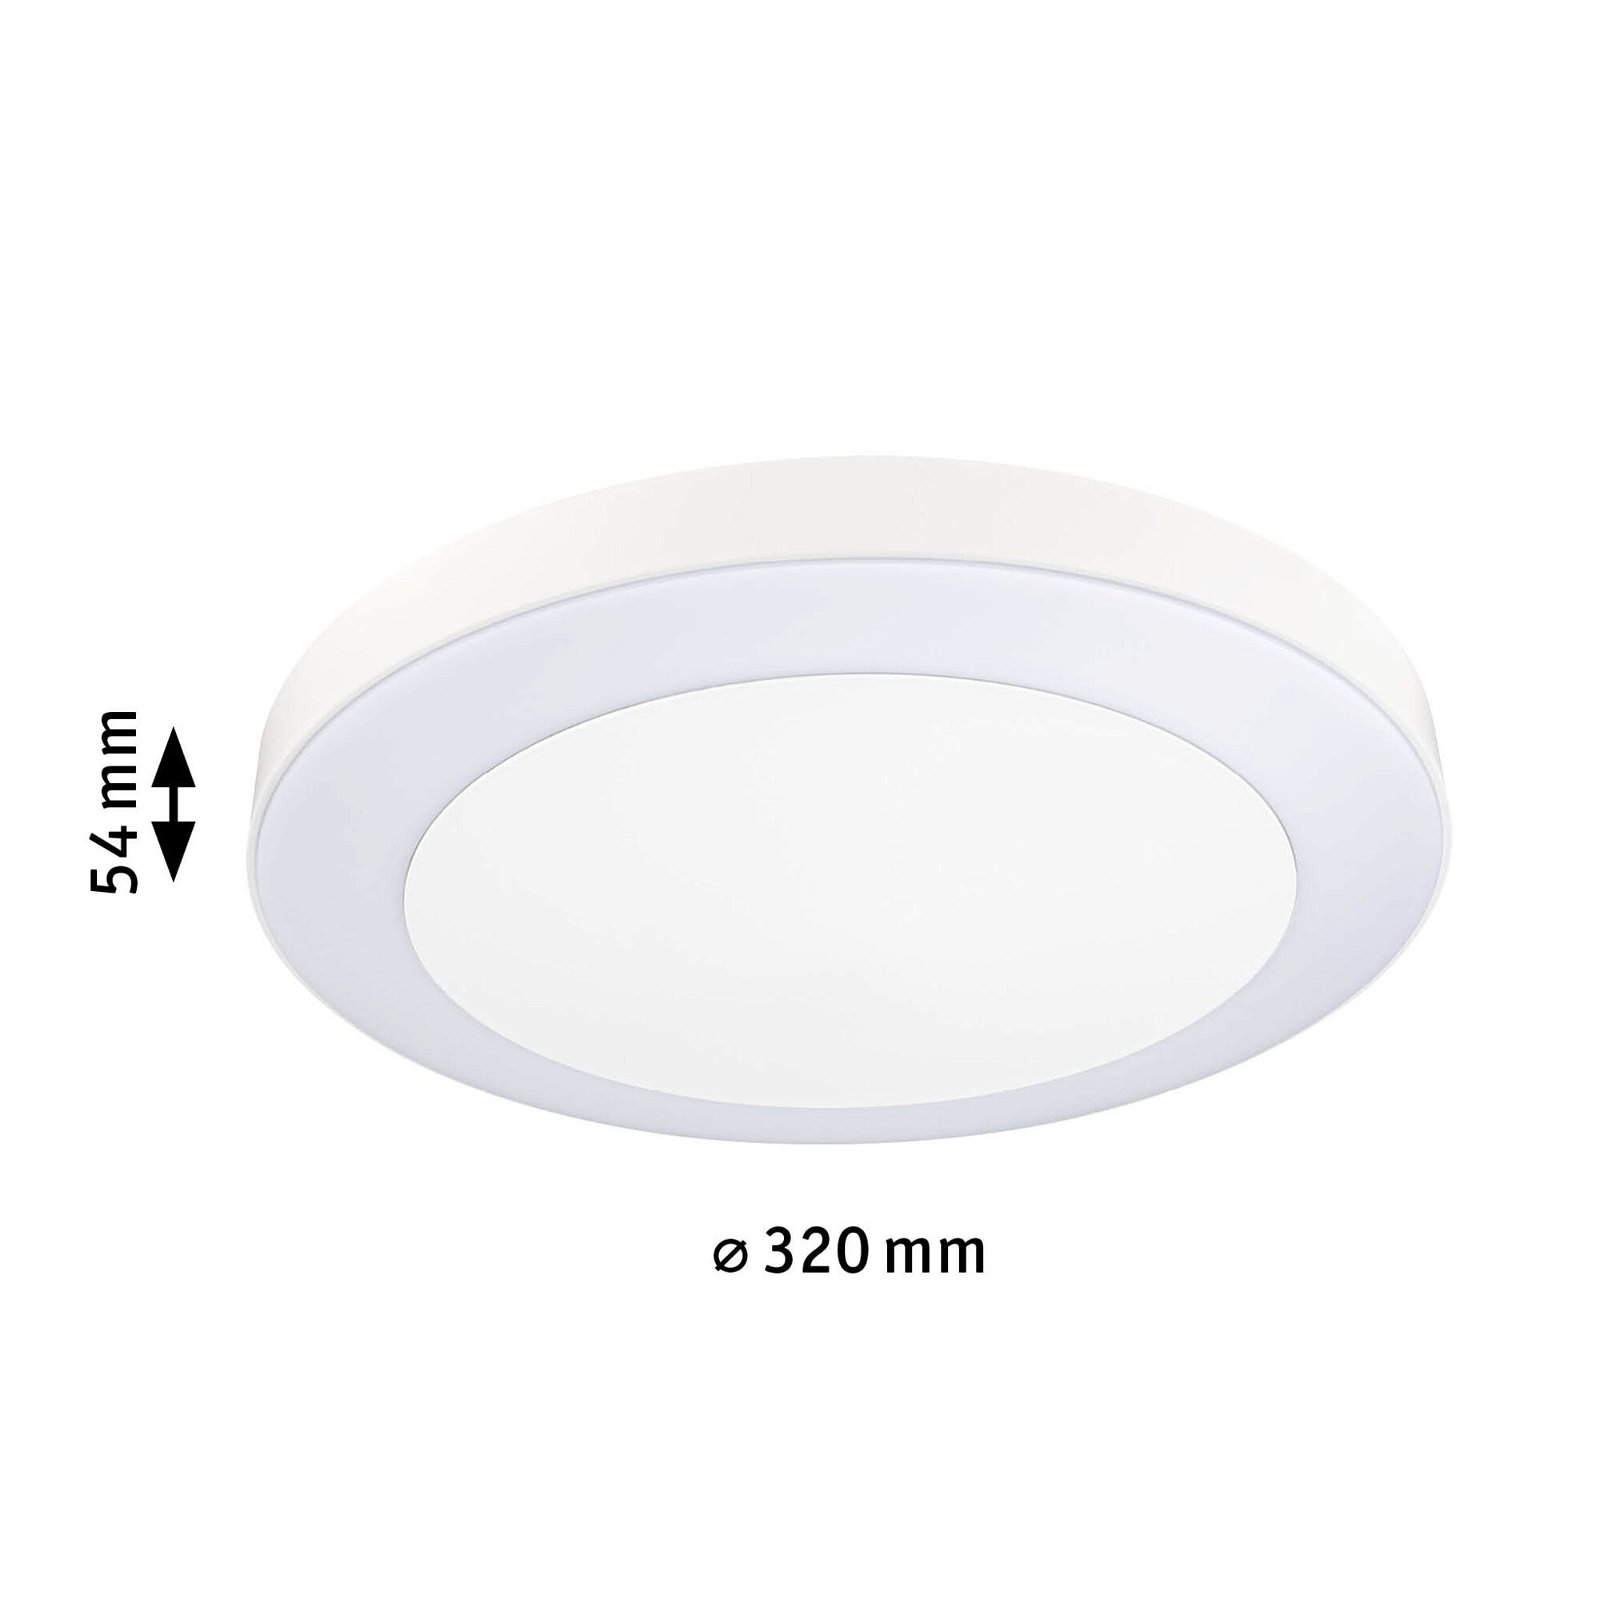 LED Ceiling luminaire Smart Home Zigbee Circula Dusk sensor insect-friendly IP44 round 320mm Tunable Warm 14W 880lm 230V White Plastic